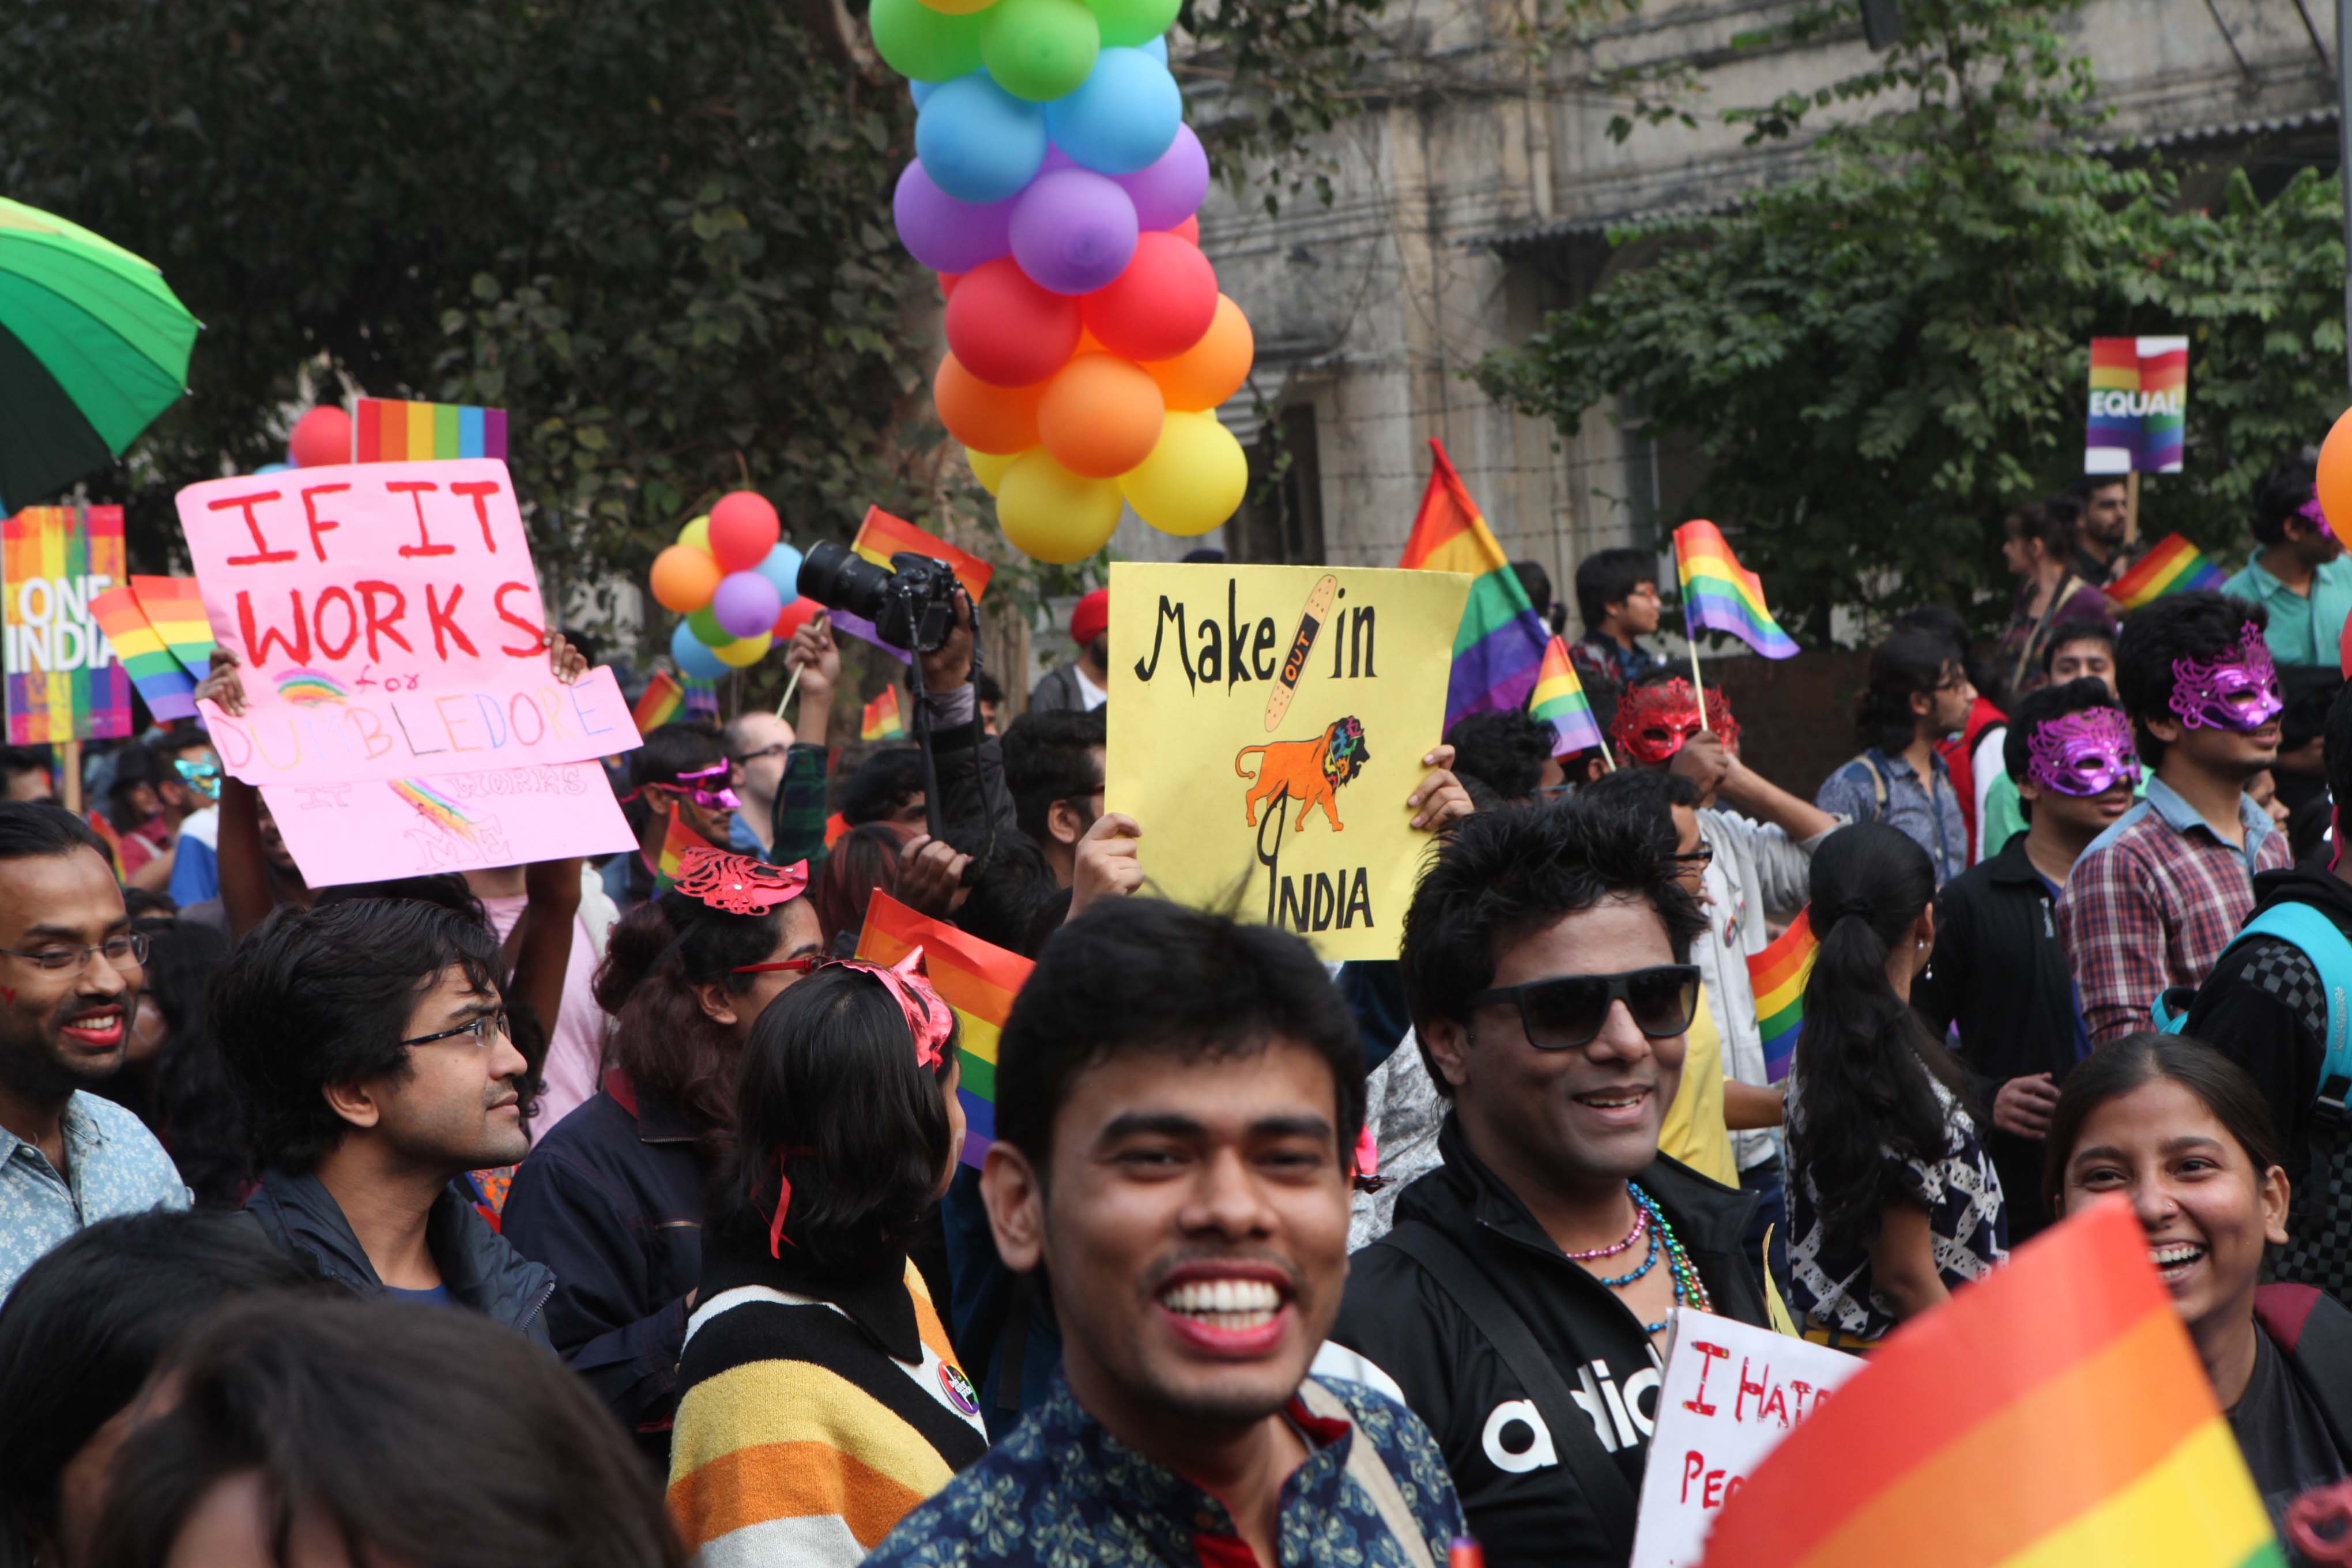 Delhi Queer Pride Parade Thousands March For Equality And A Life Without Fear